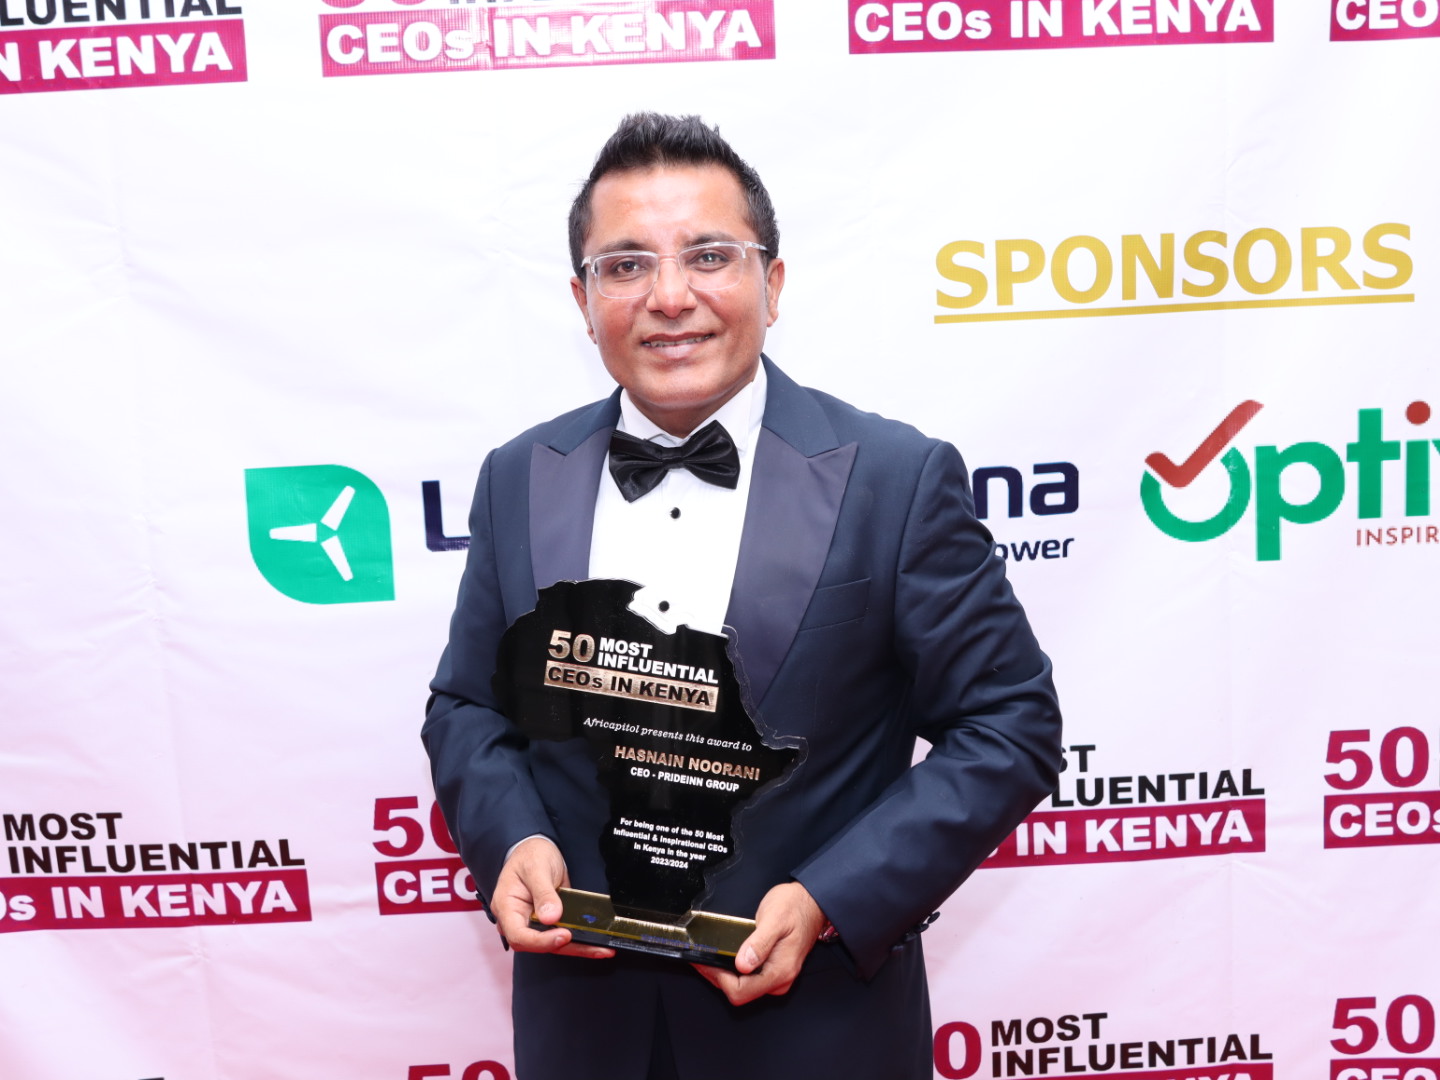 PrideInn Hotels, Resorts, and Camps MD Hasnain Noorani Recognised Among the 50 Most Influential CEOs in Kenya